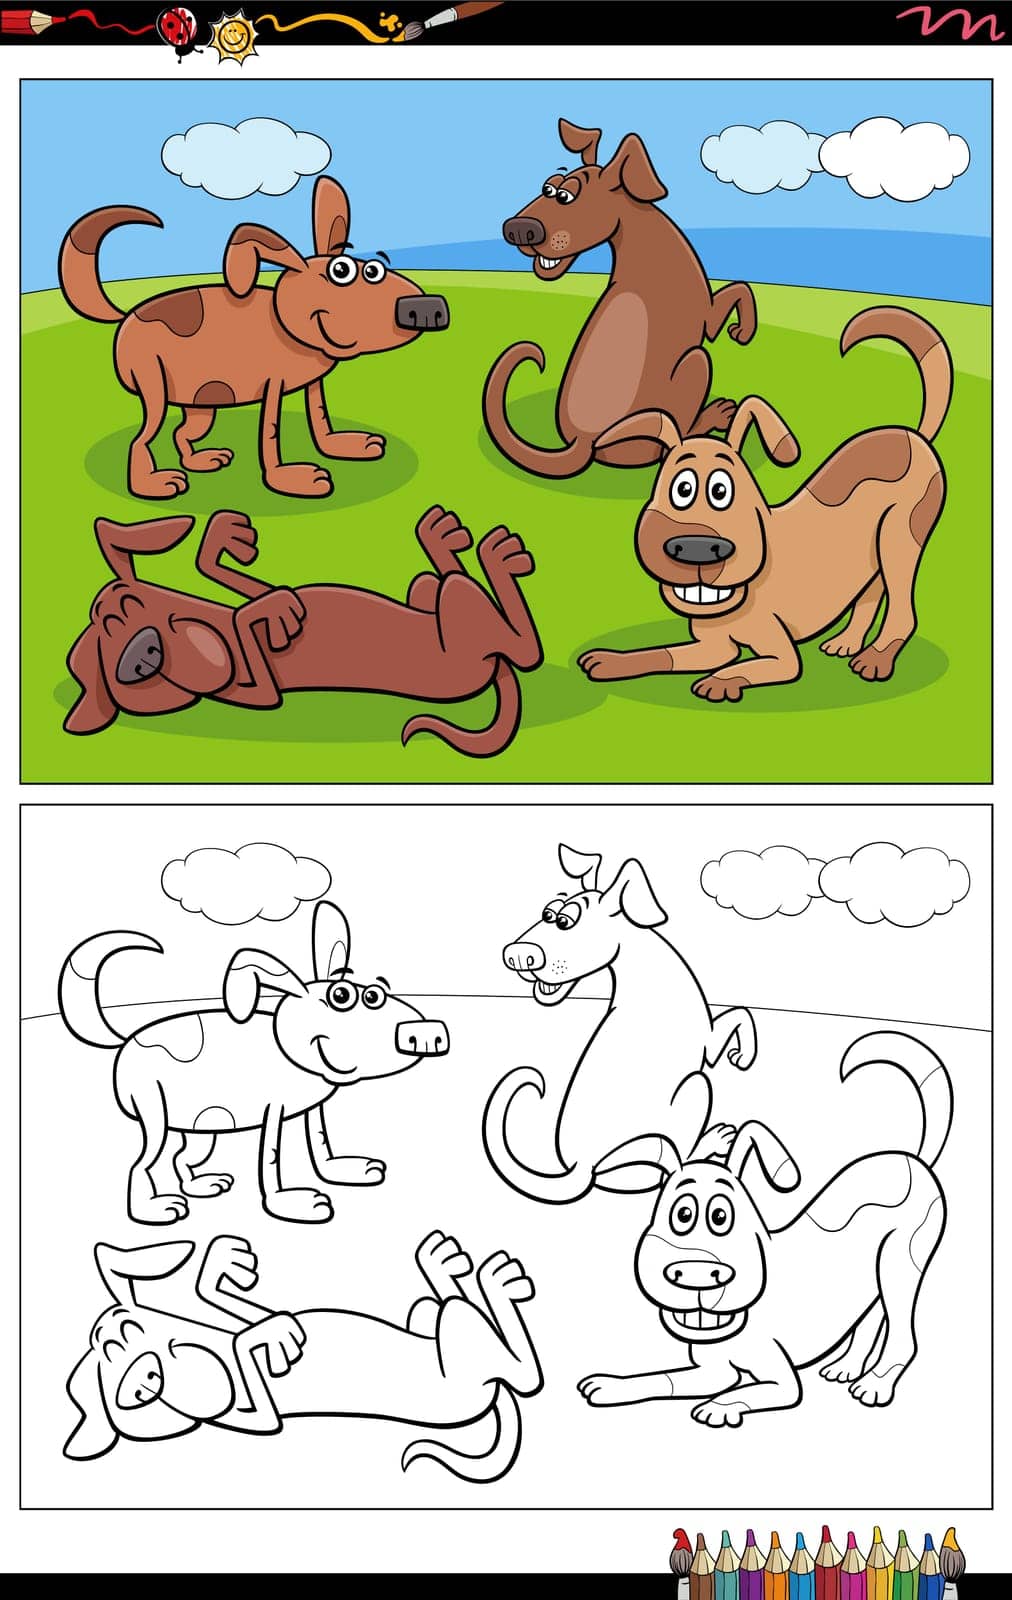 cartoon dogs or puppies characters group coloring page by izakowski